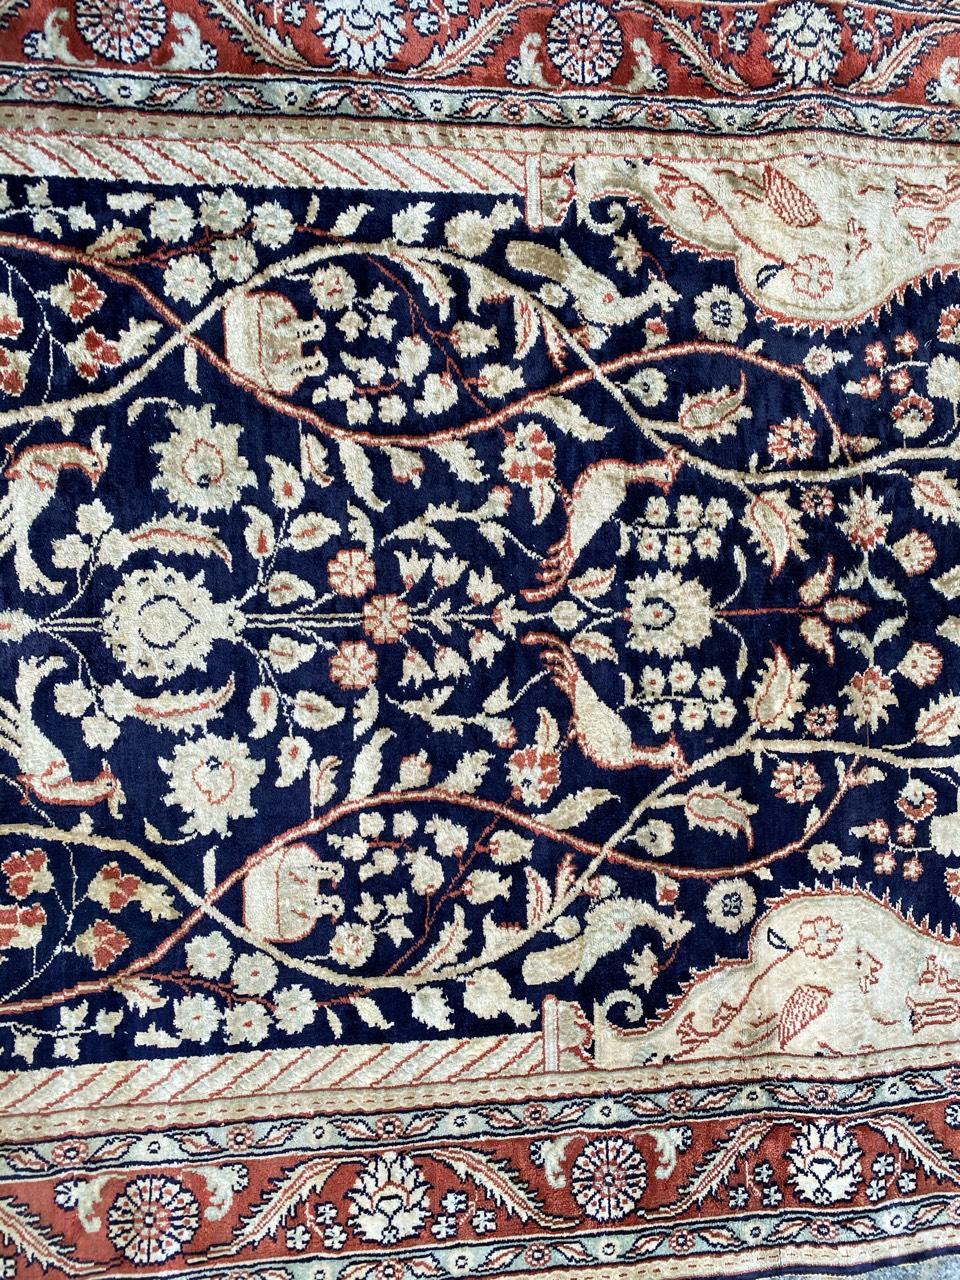 Very nice little silk rug with beautiful floral design and nice colors with blue, orange, beige and brown, entirely and finely hand knotted with silk velvet on silk foundation.

✨✨✨
